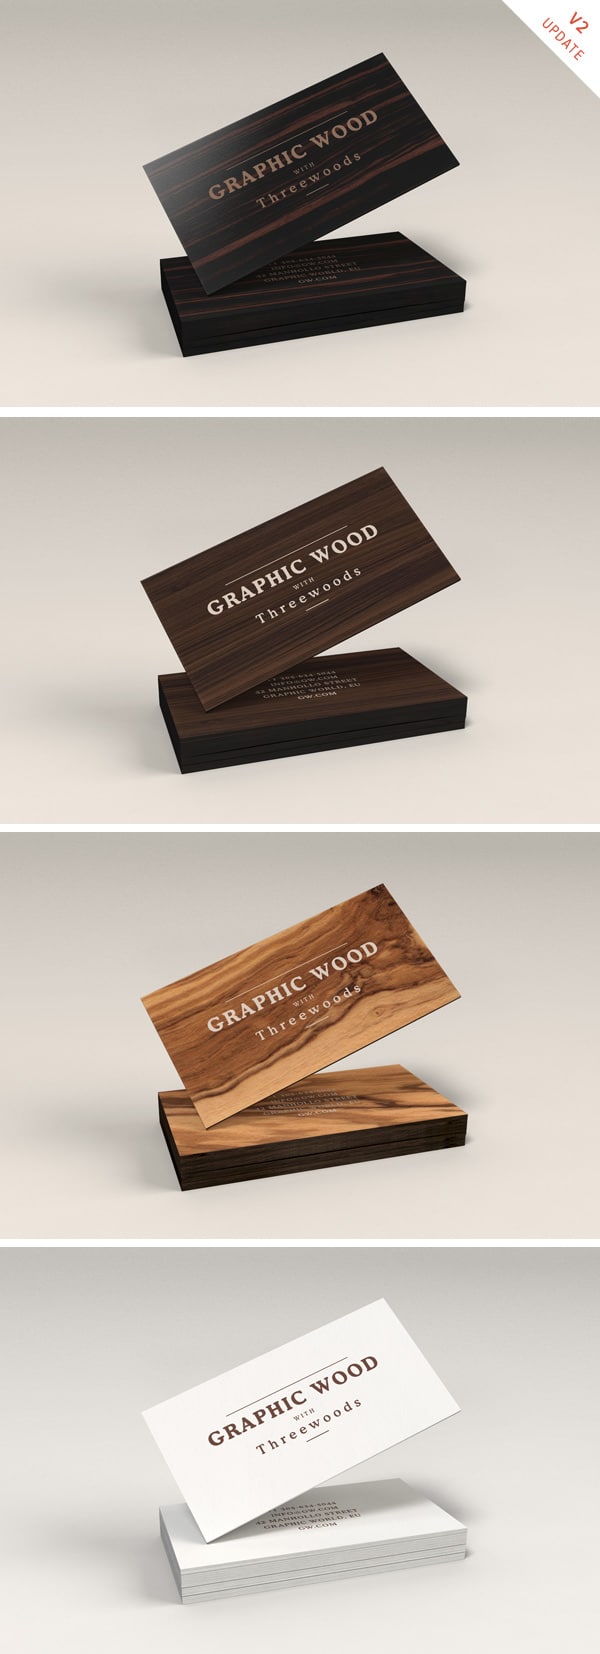 Awesome Classy Wooden Business Cards